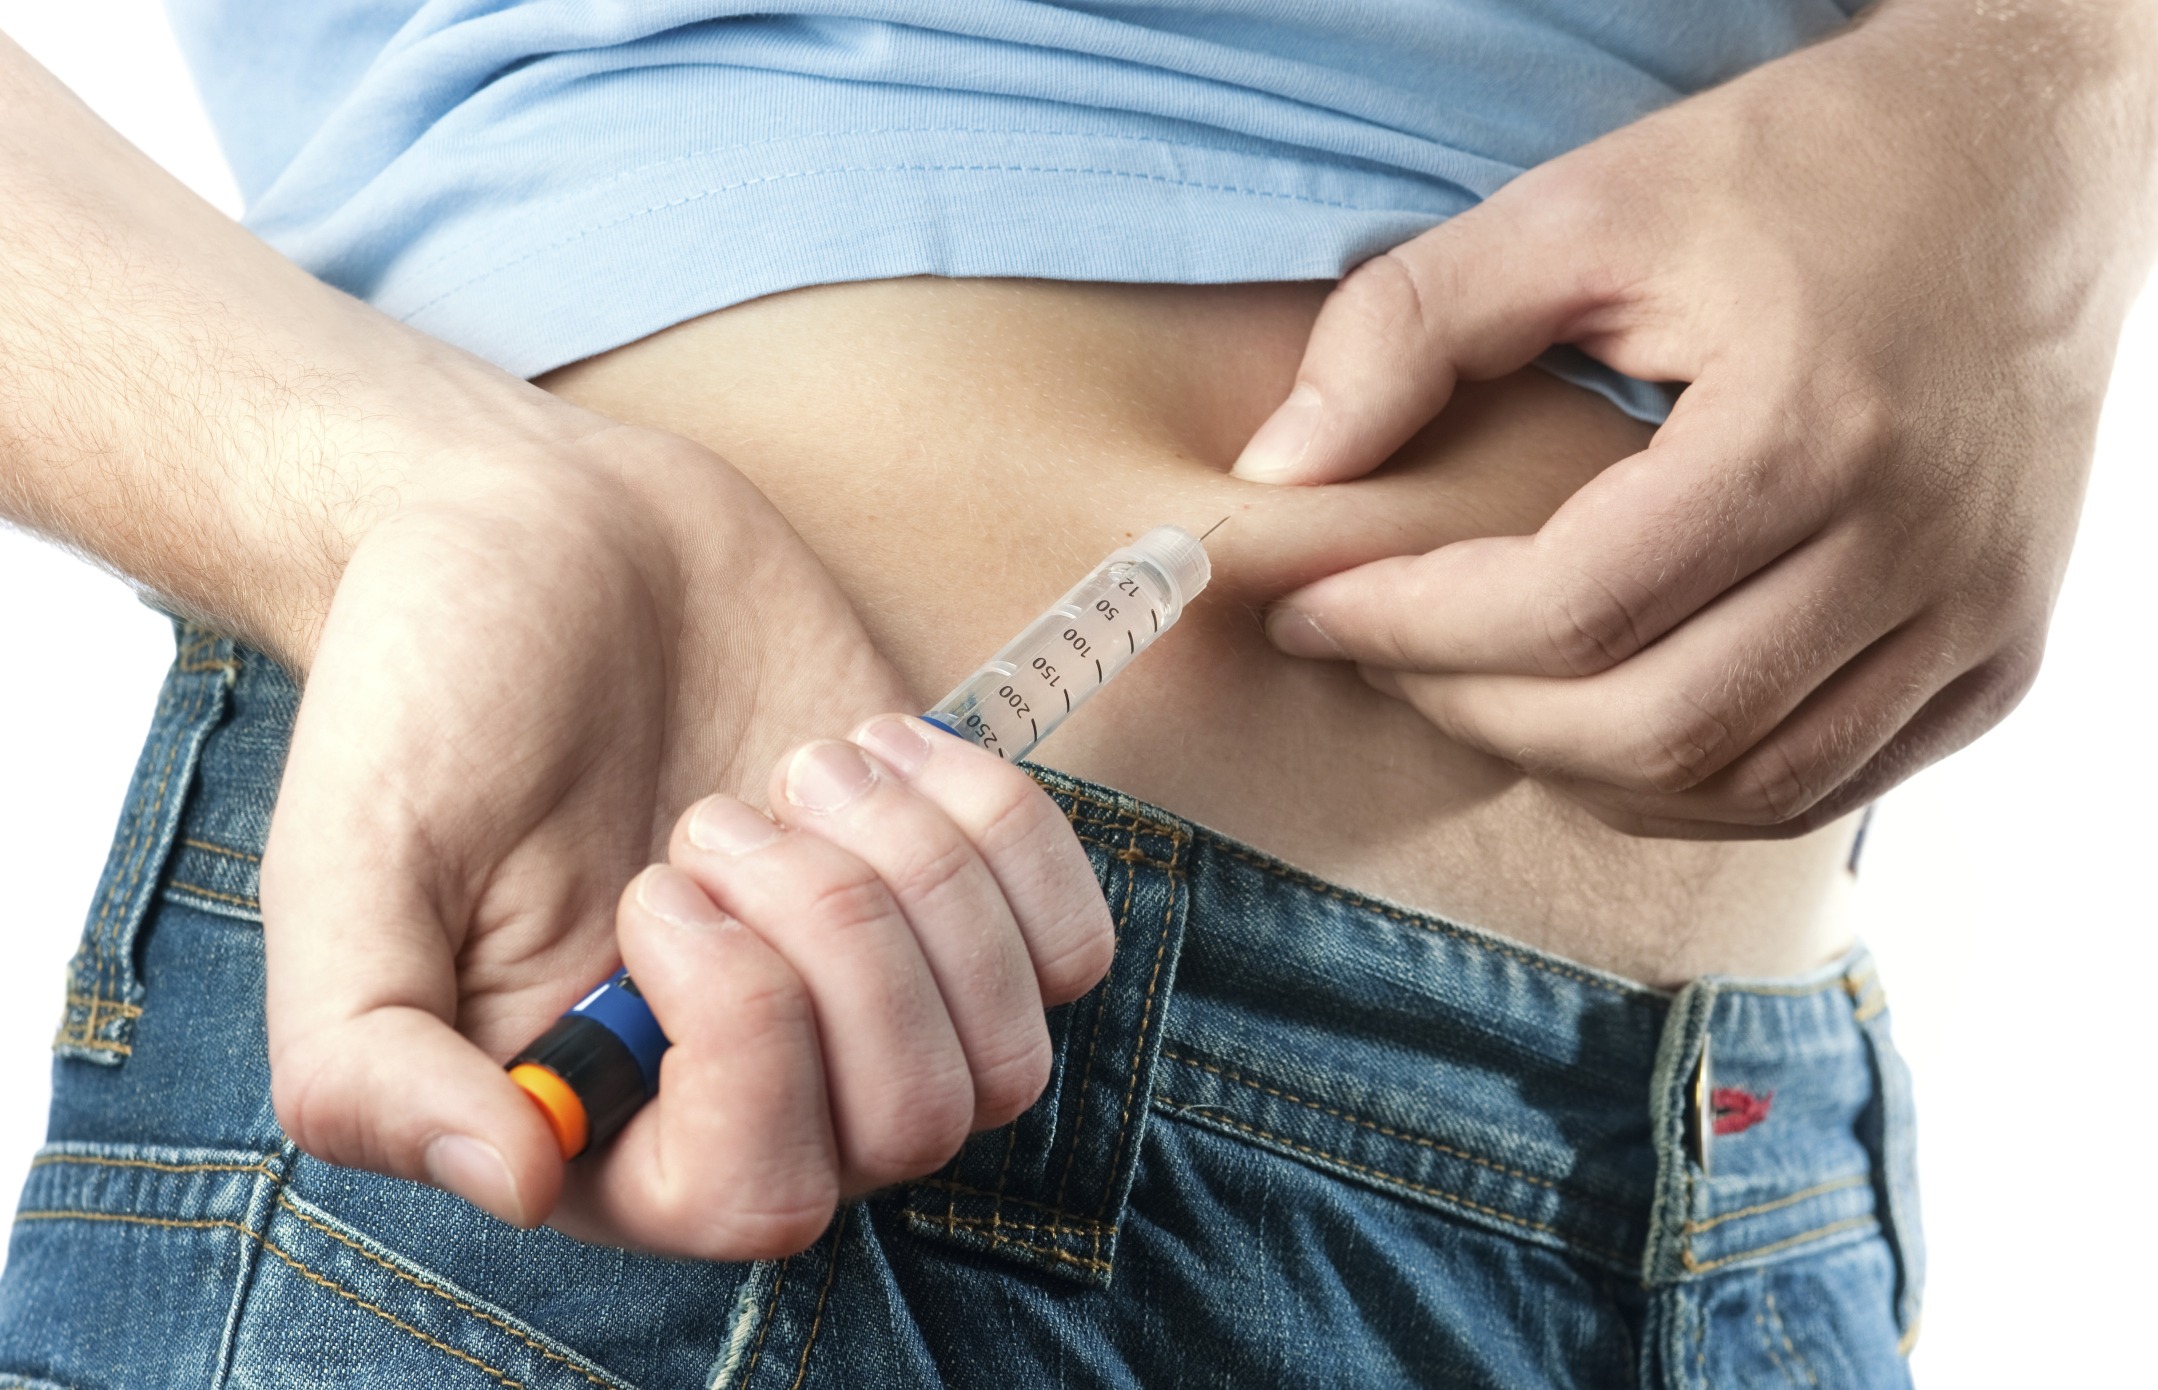 How Does Insulin Function In The Human Body?